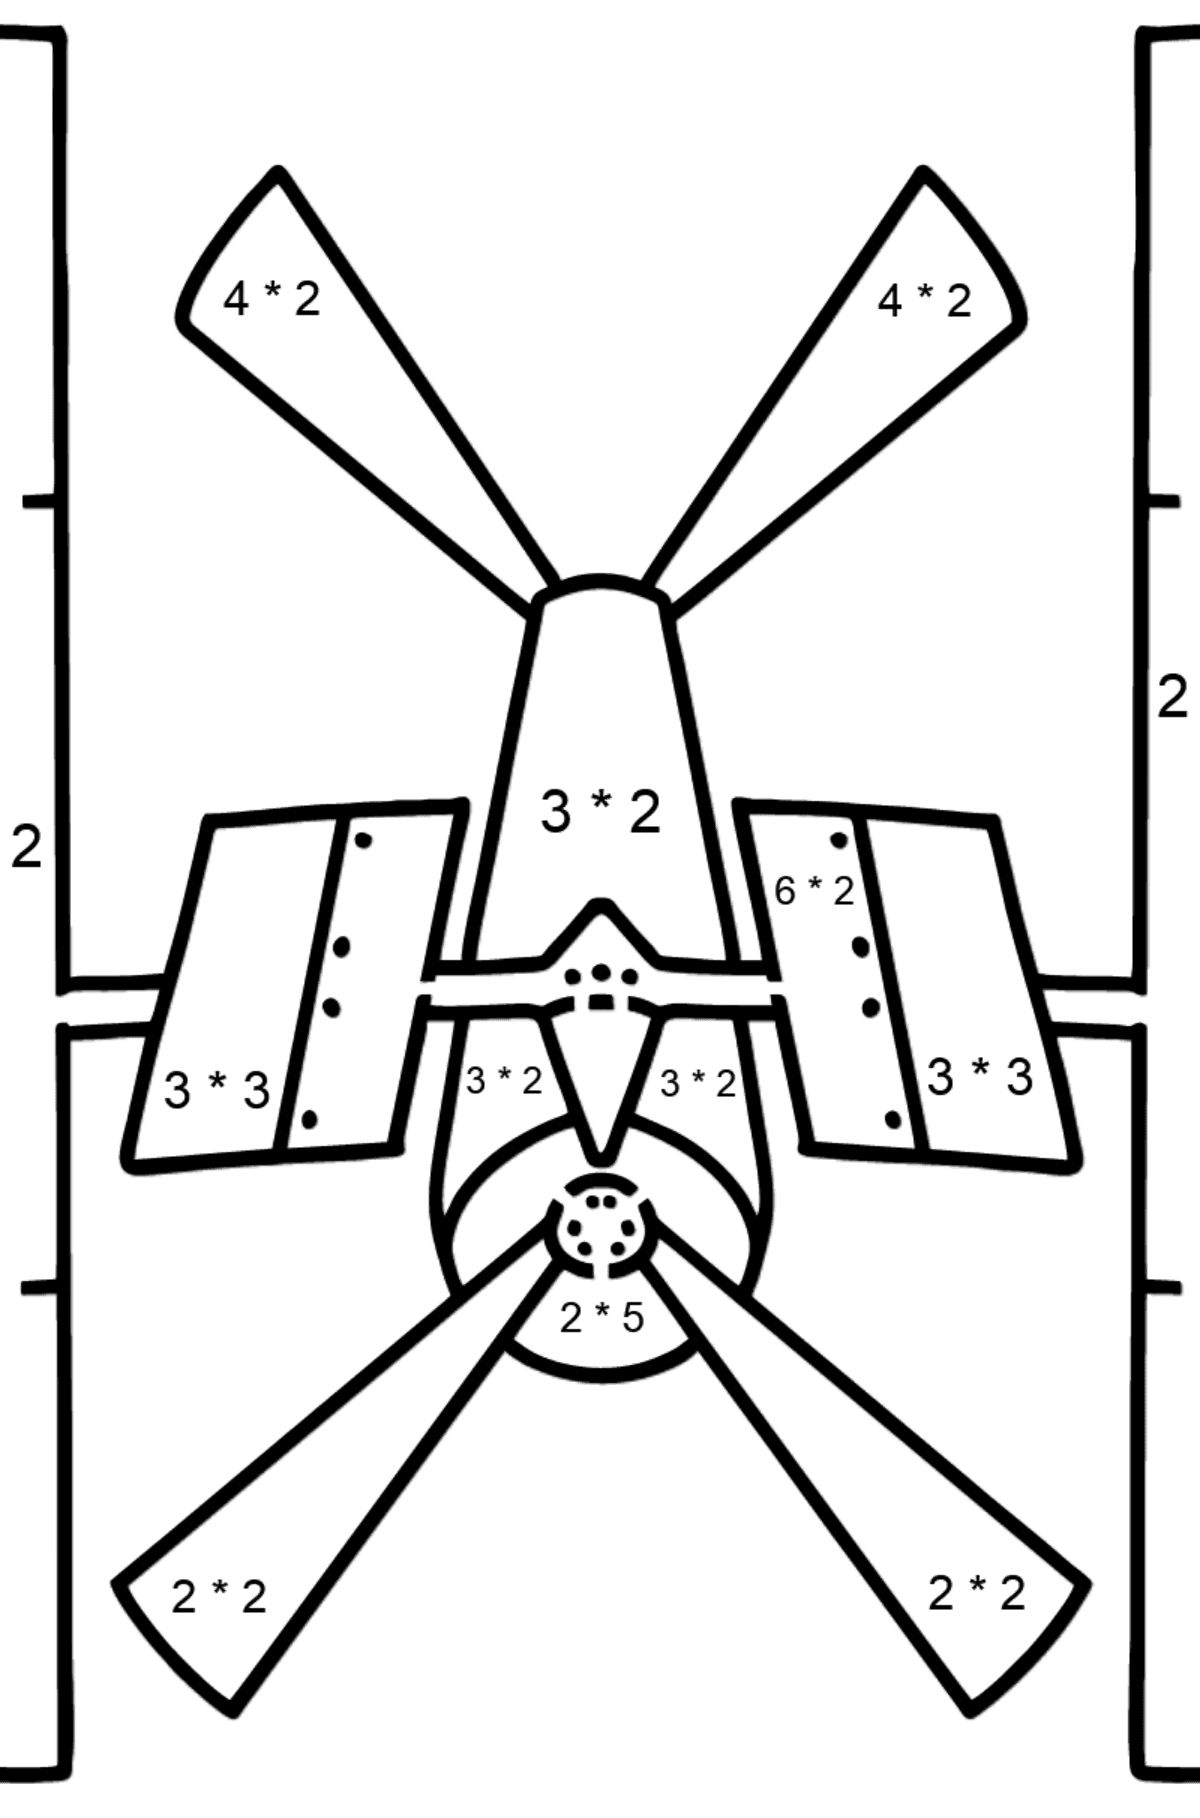 Space Station coloring page - Math Coloring - Multiplication for Kids